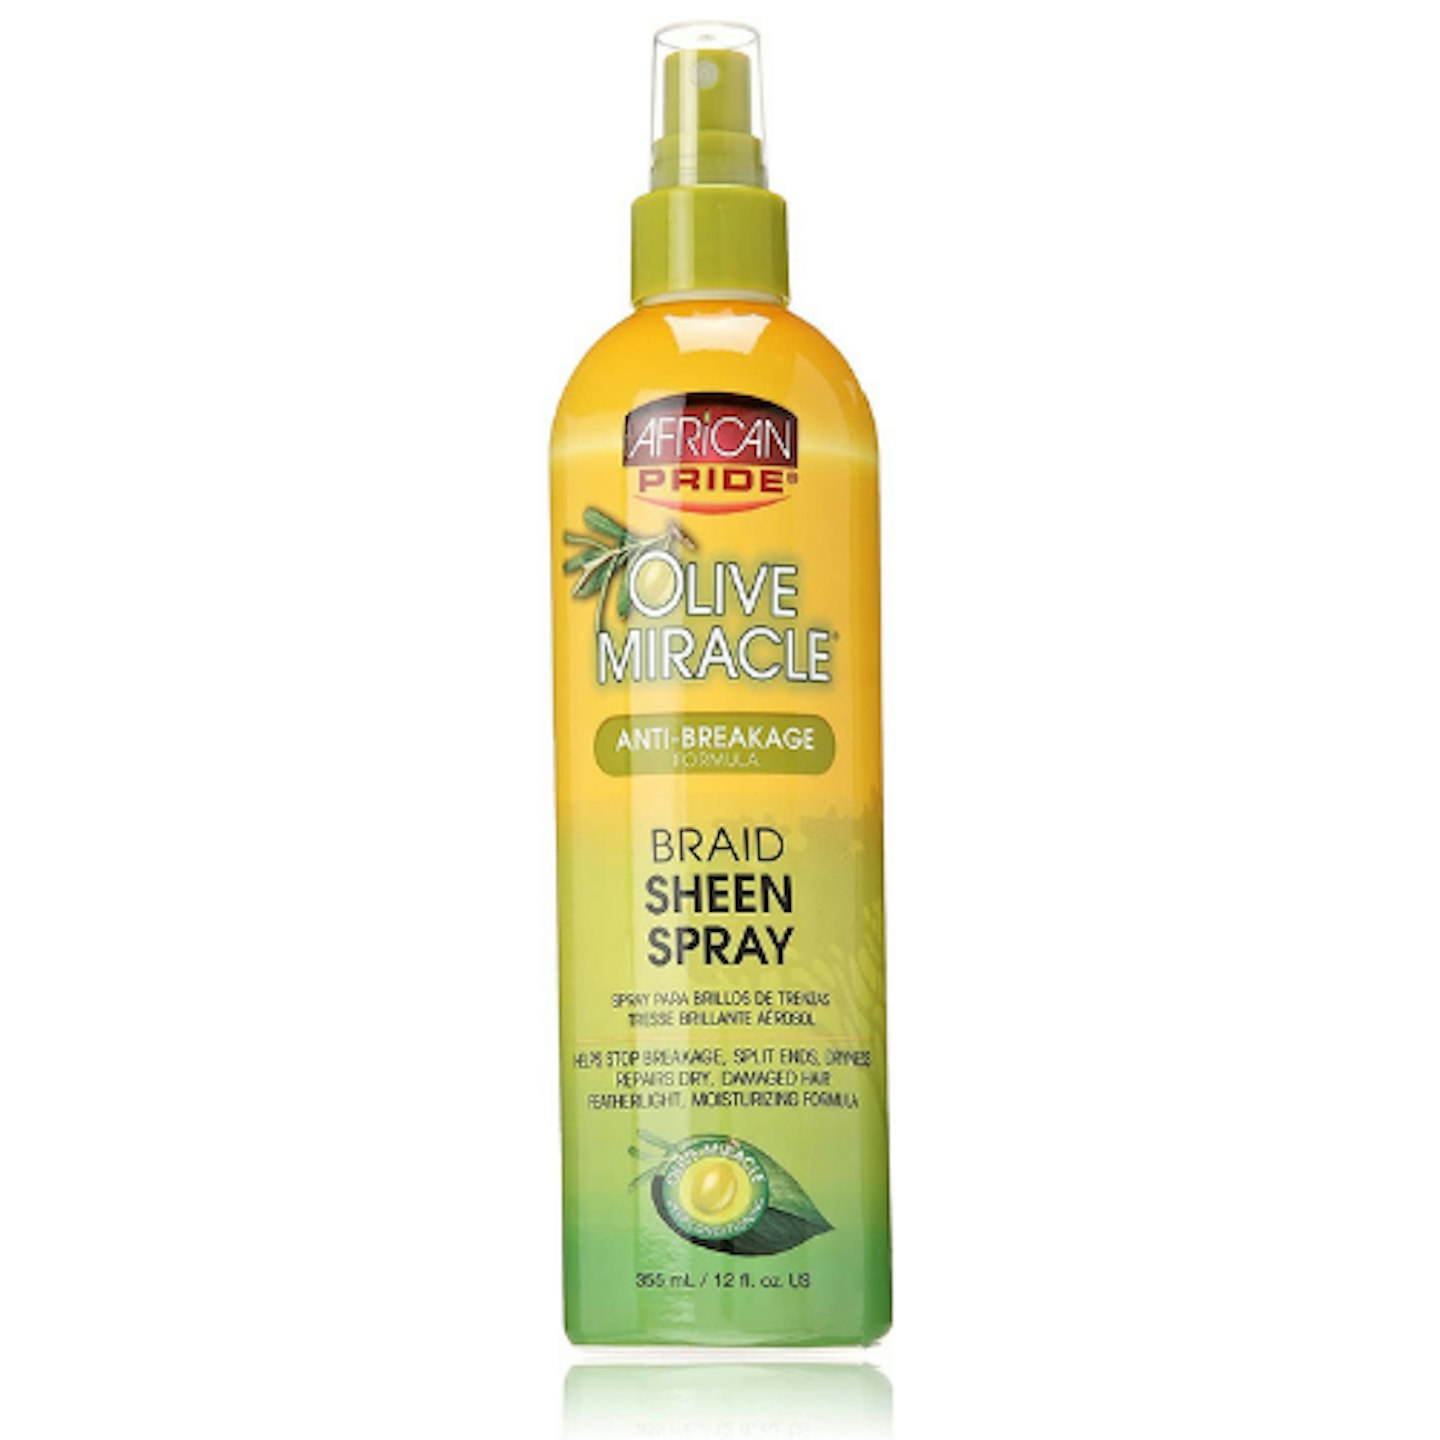 African Pride Olive Miracle Anti-Breakage Braid Sheen Spray on white background